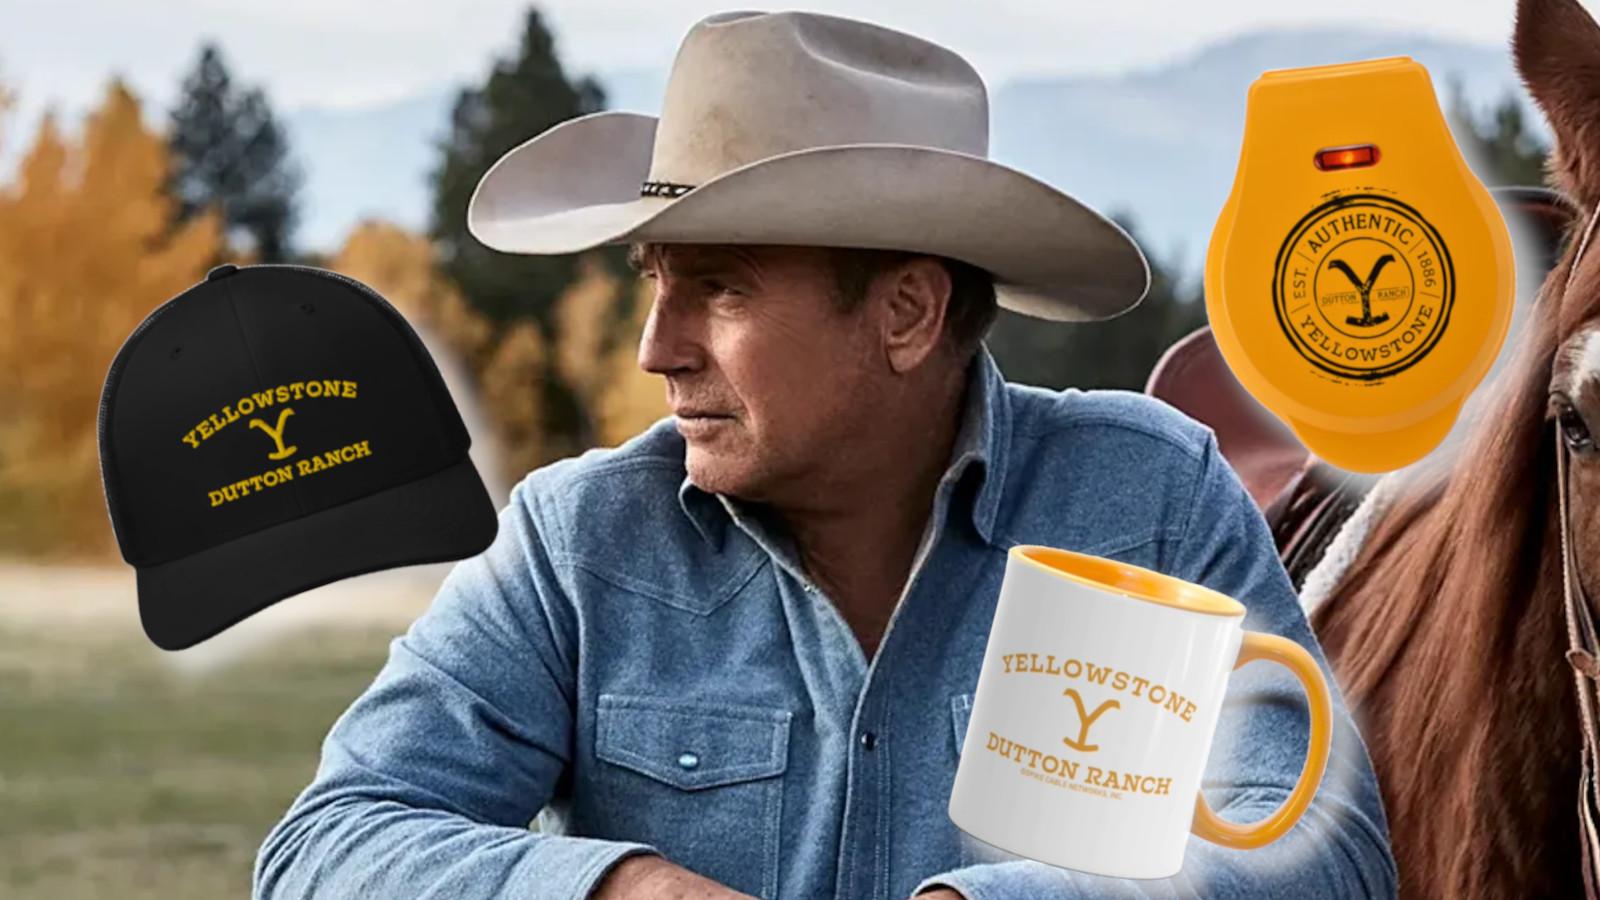 Kevin Costner as John Dutton on Yellowstone, with items from the Yellowstone store around him